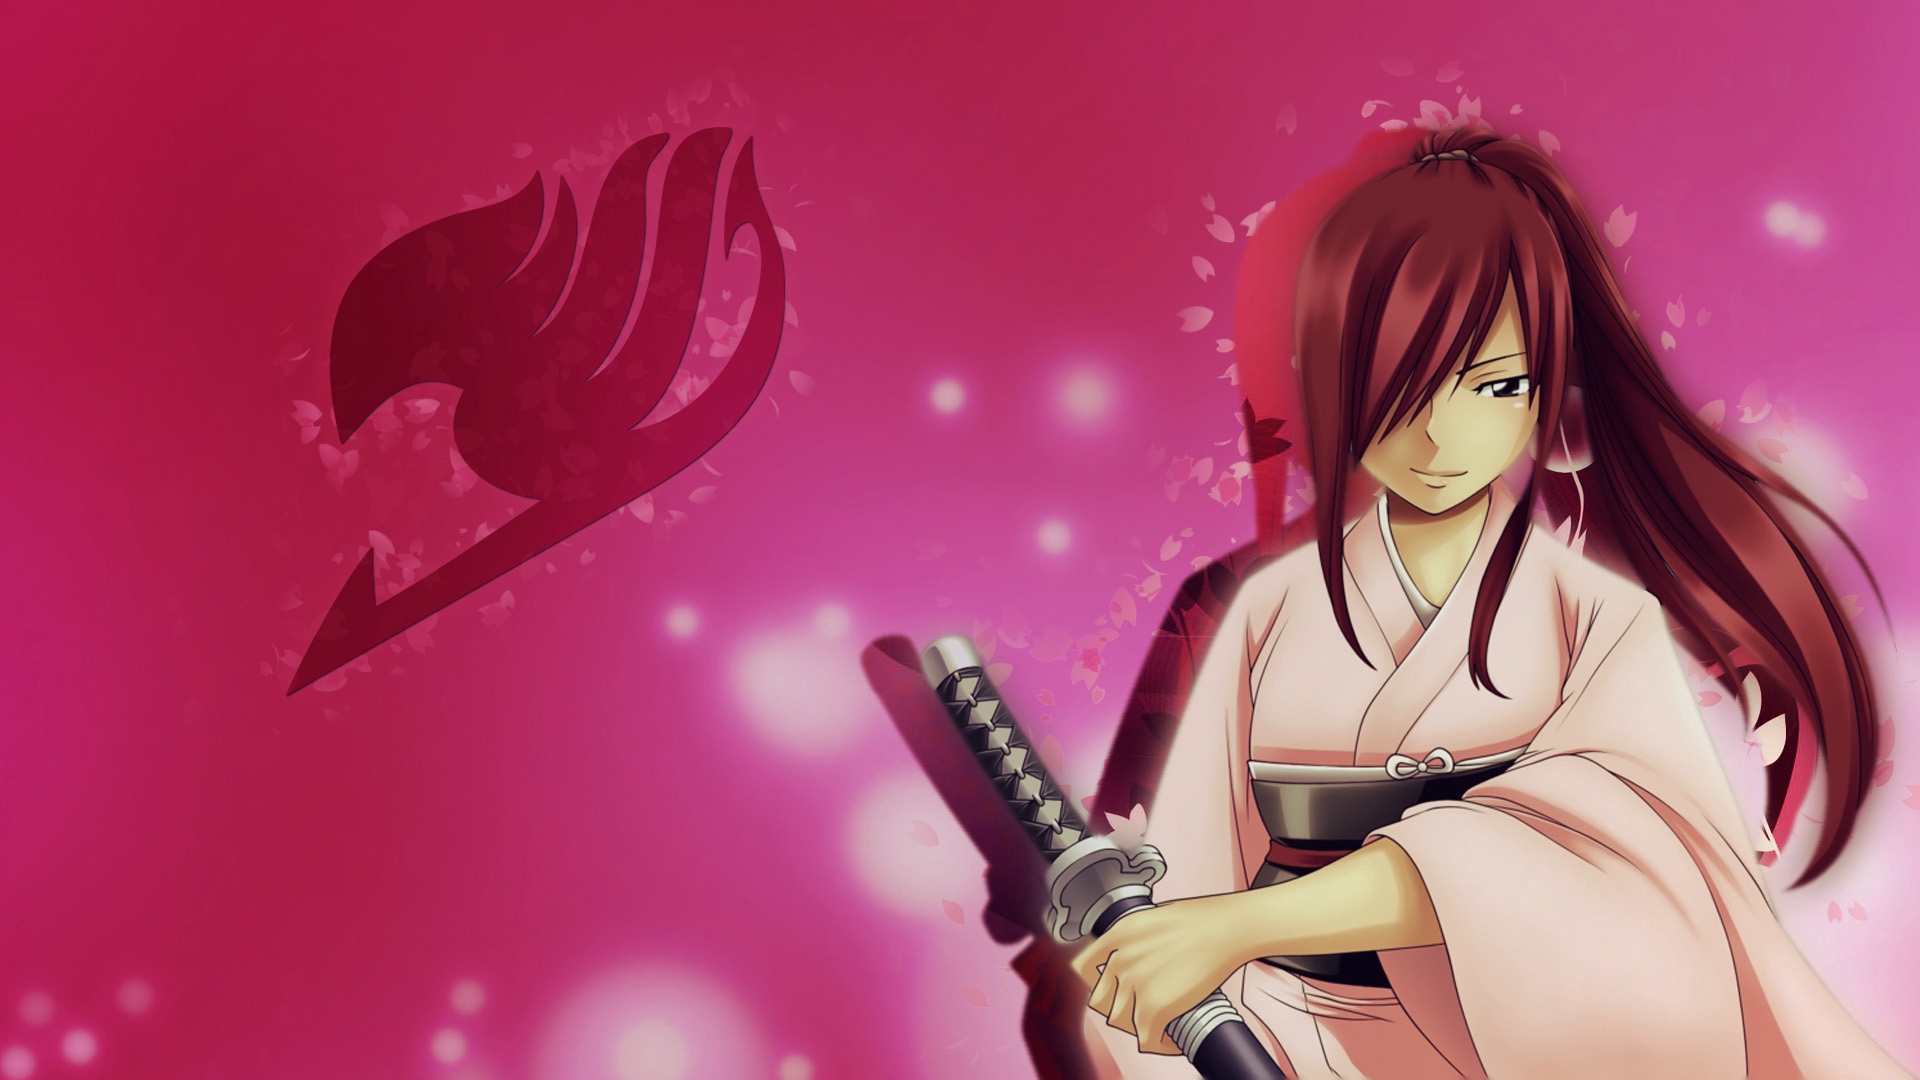 Wallpaper Erza Scarlet, Fairy Tail, Mage, Sword, Art, - Erza Scarlet - HD Wallpaper 